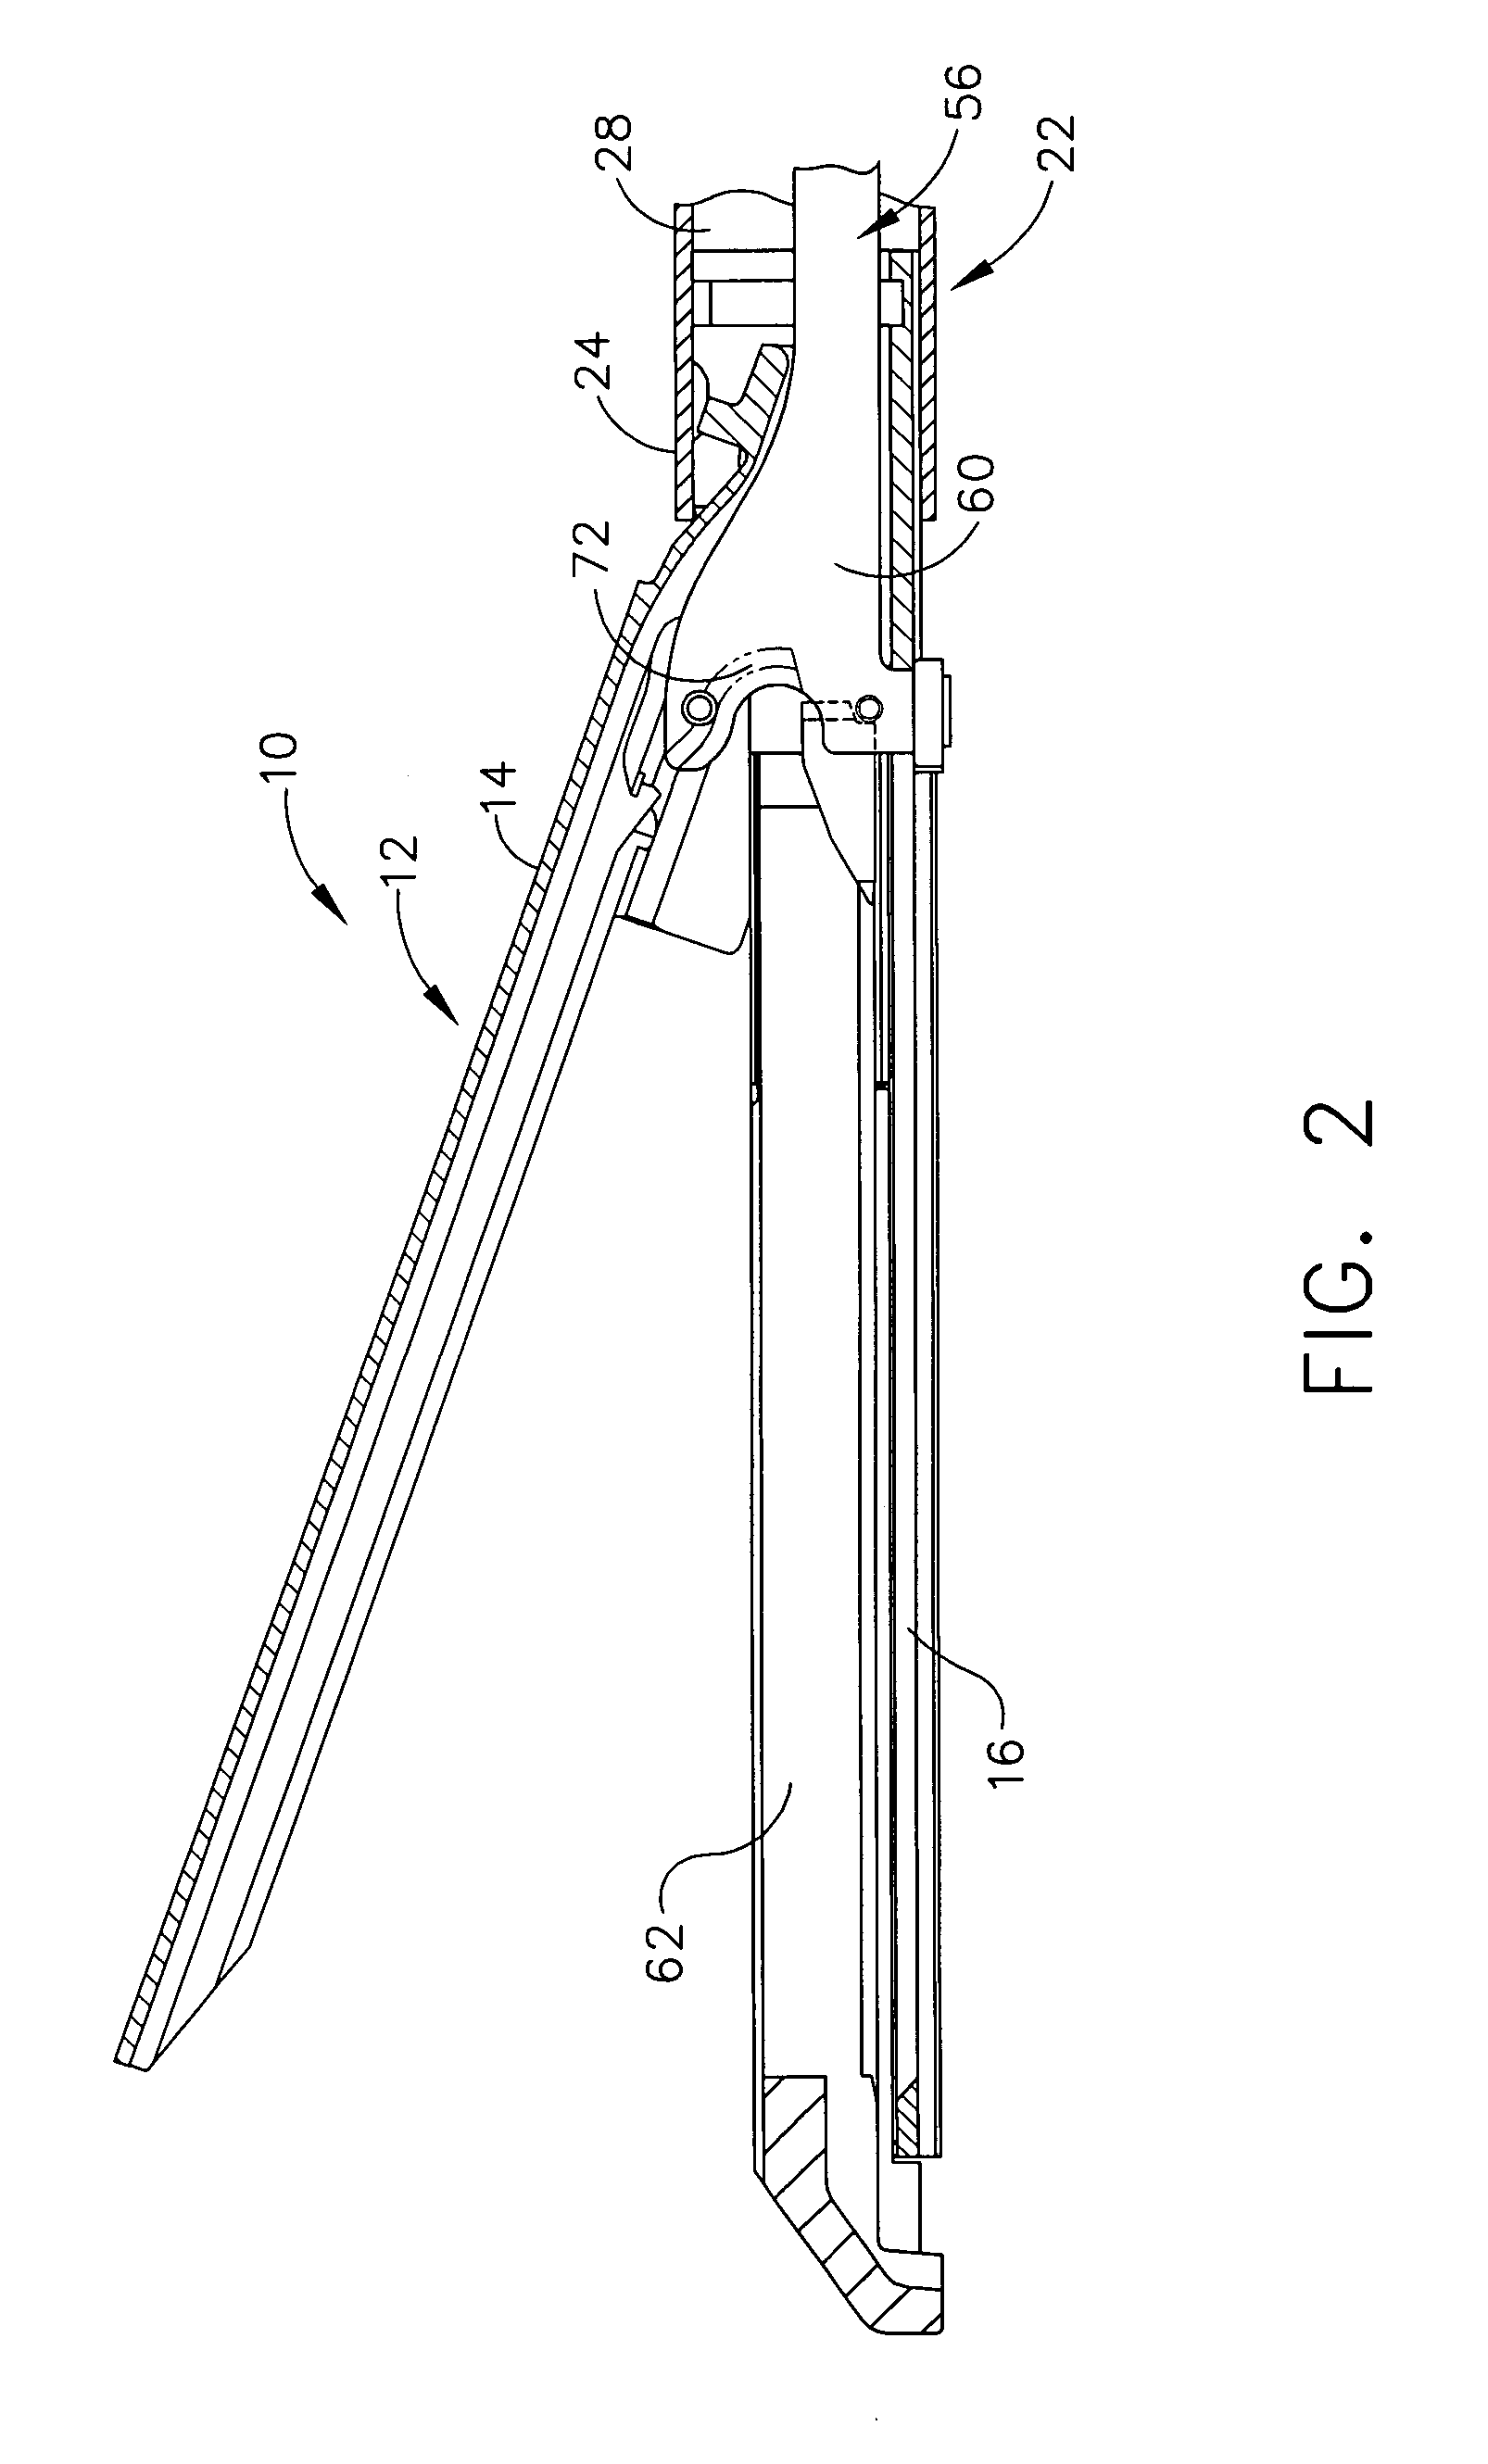 Surgical stapling instrument incorporating an uneven multistroke firing mechanism having a rotary transmission